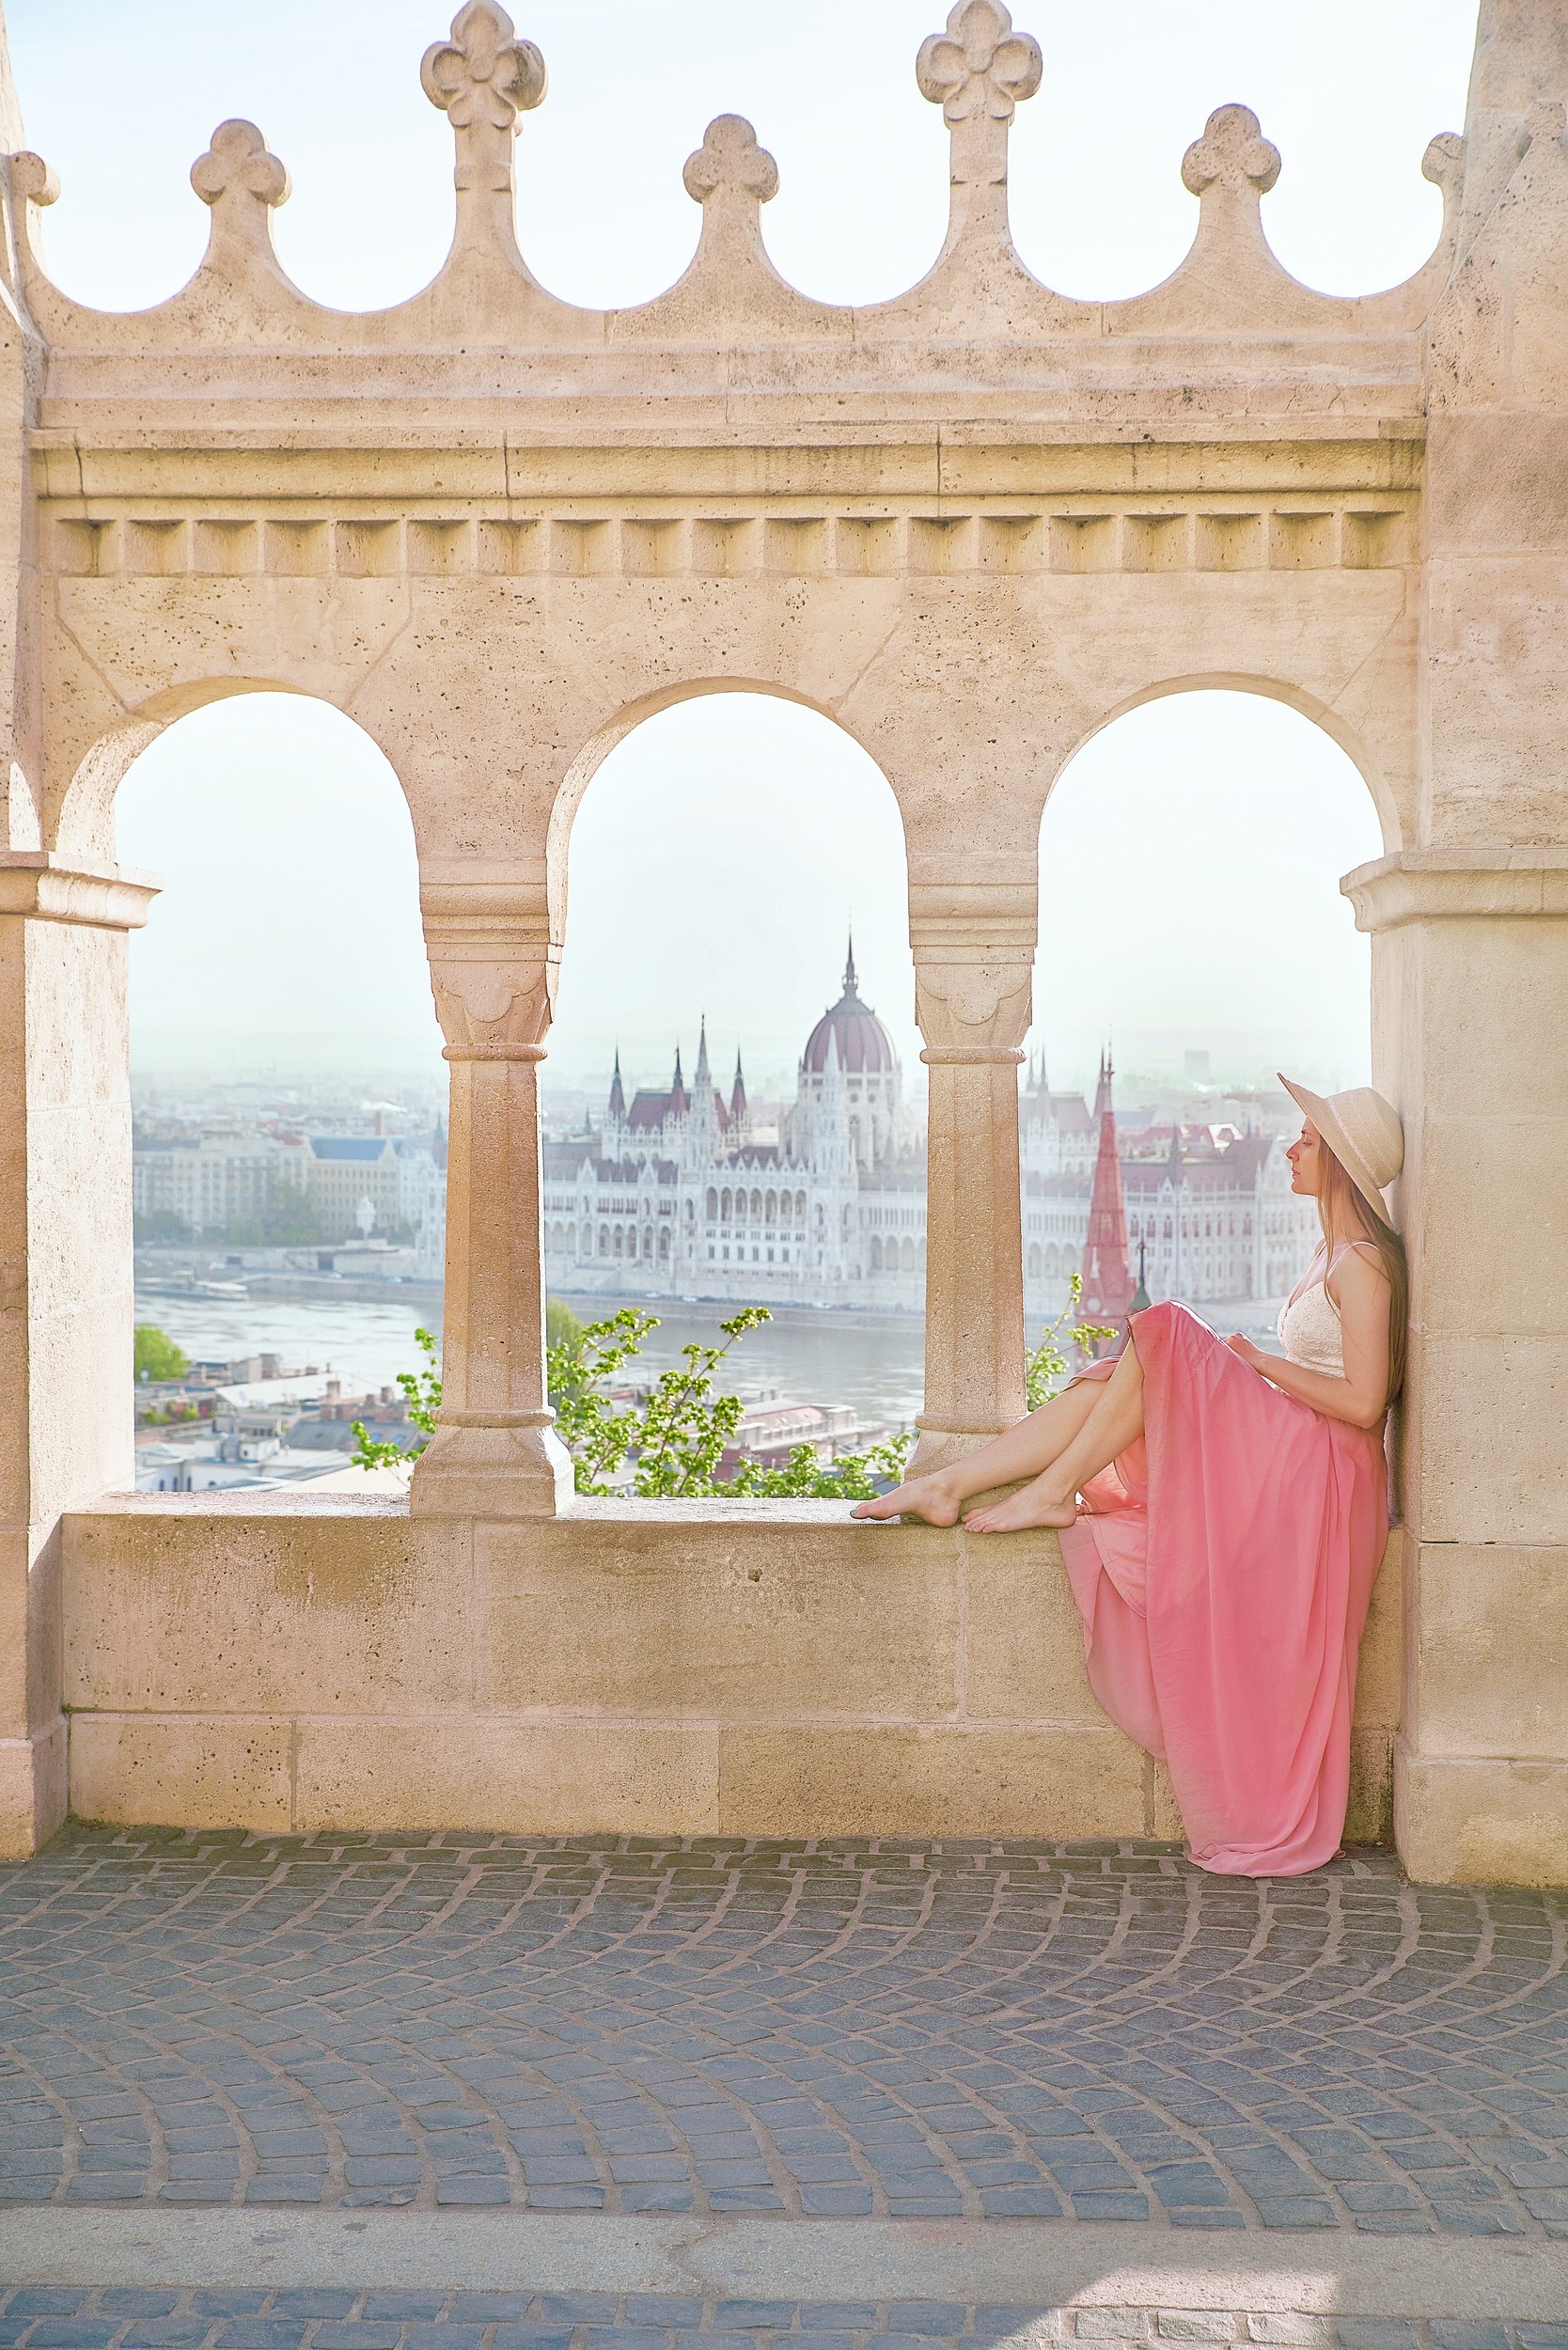 a woman sits in an archway with her feet propped up overlooking the river and city below, she is wearing a long dress and a hat